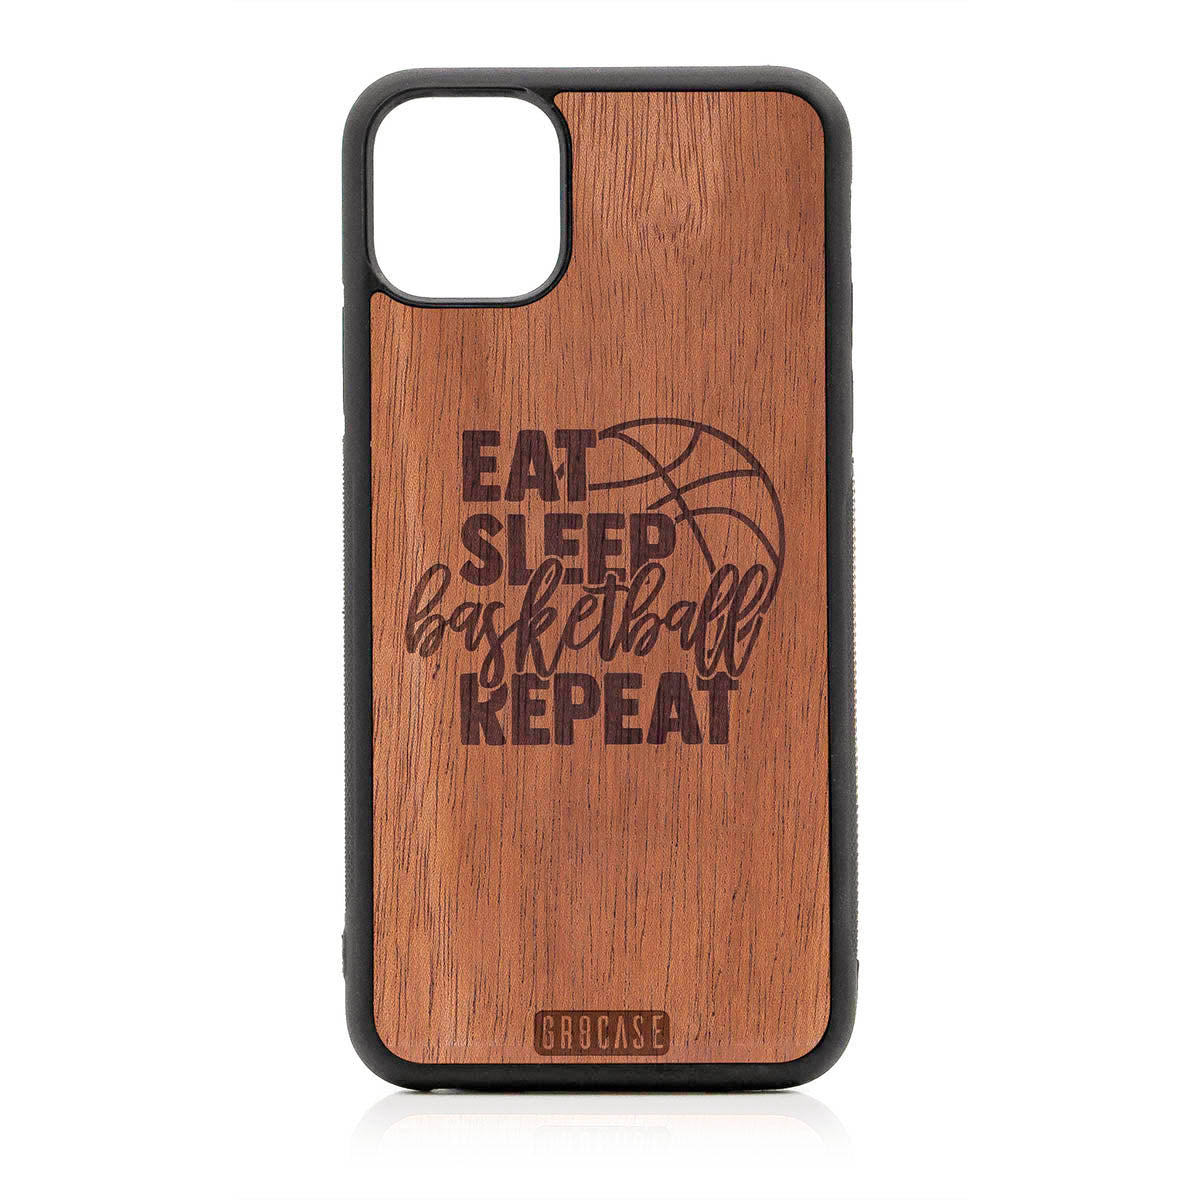 Eat Sleep Basketball Repeat Design Wood Case For iPhone 11 Pro Max